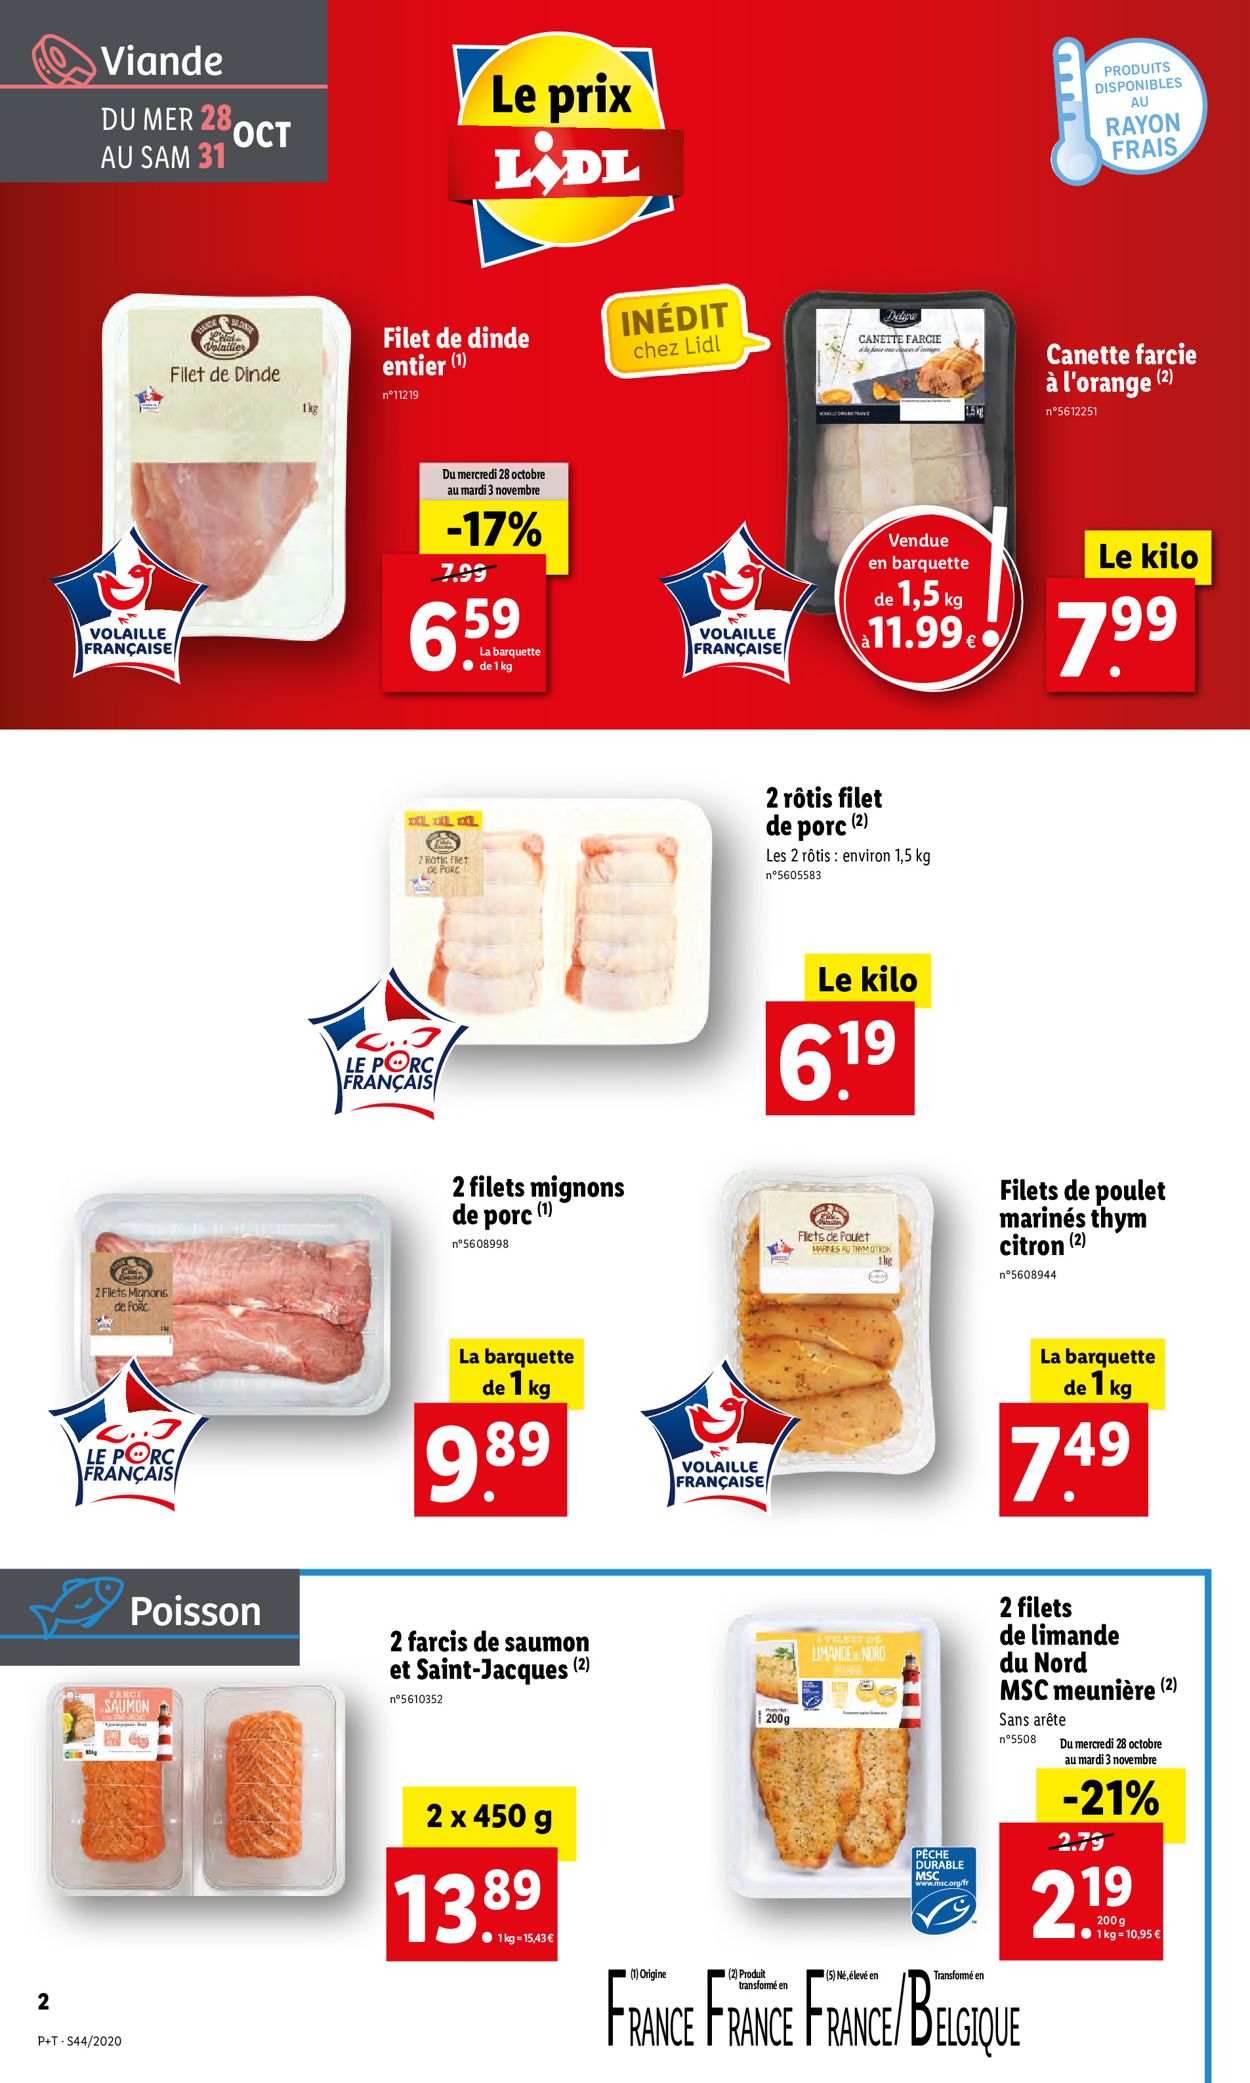 Lidl Catalogue - 28.10-03.11.2020 (Page 2)